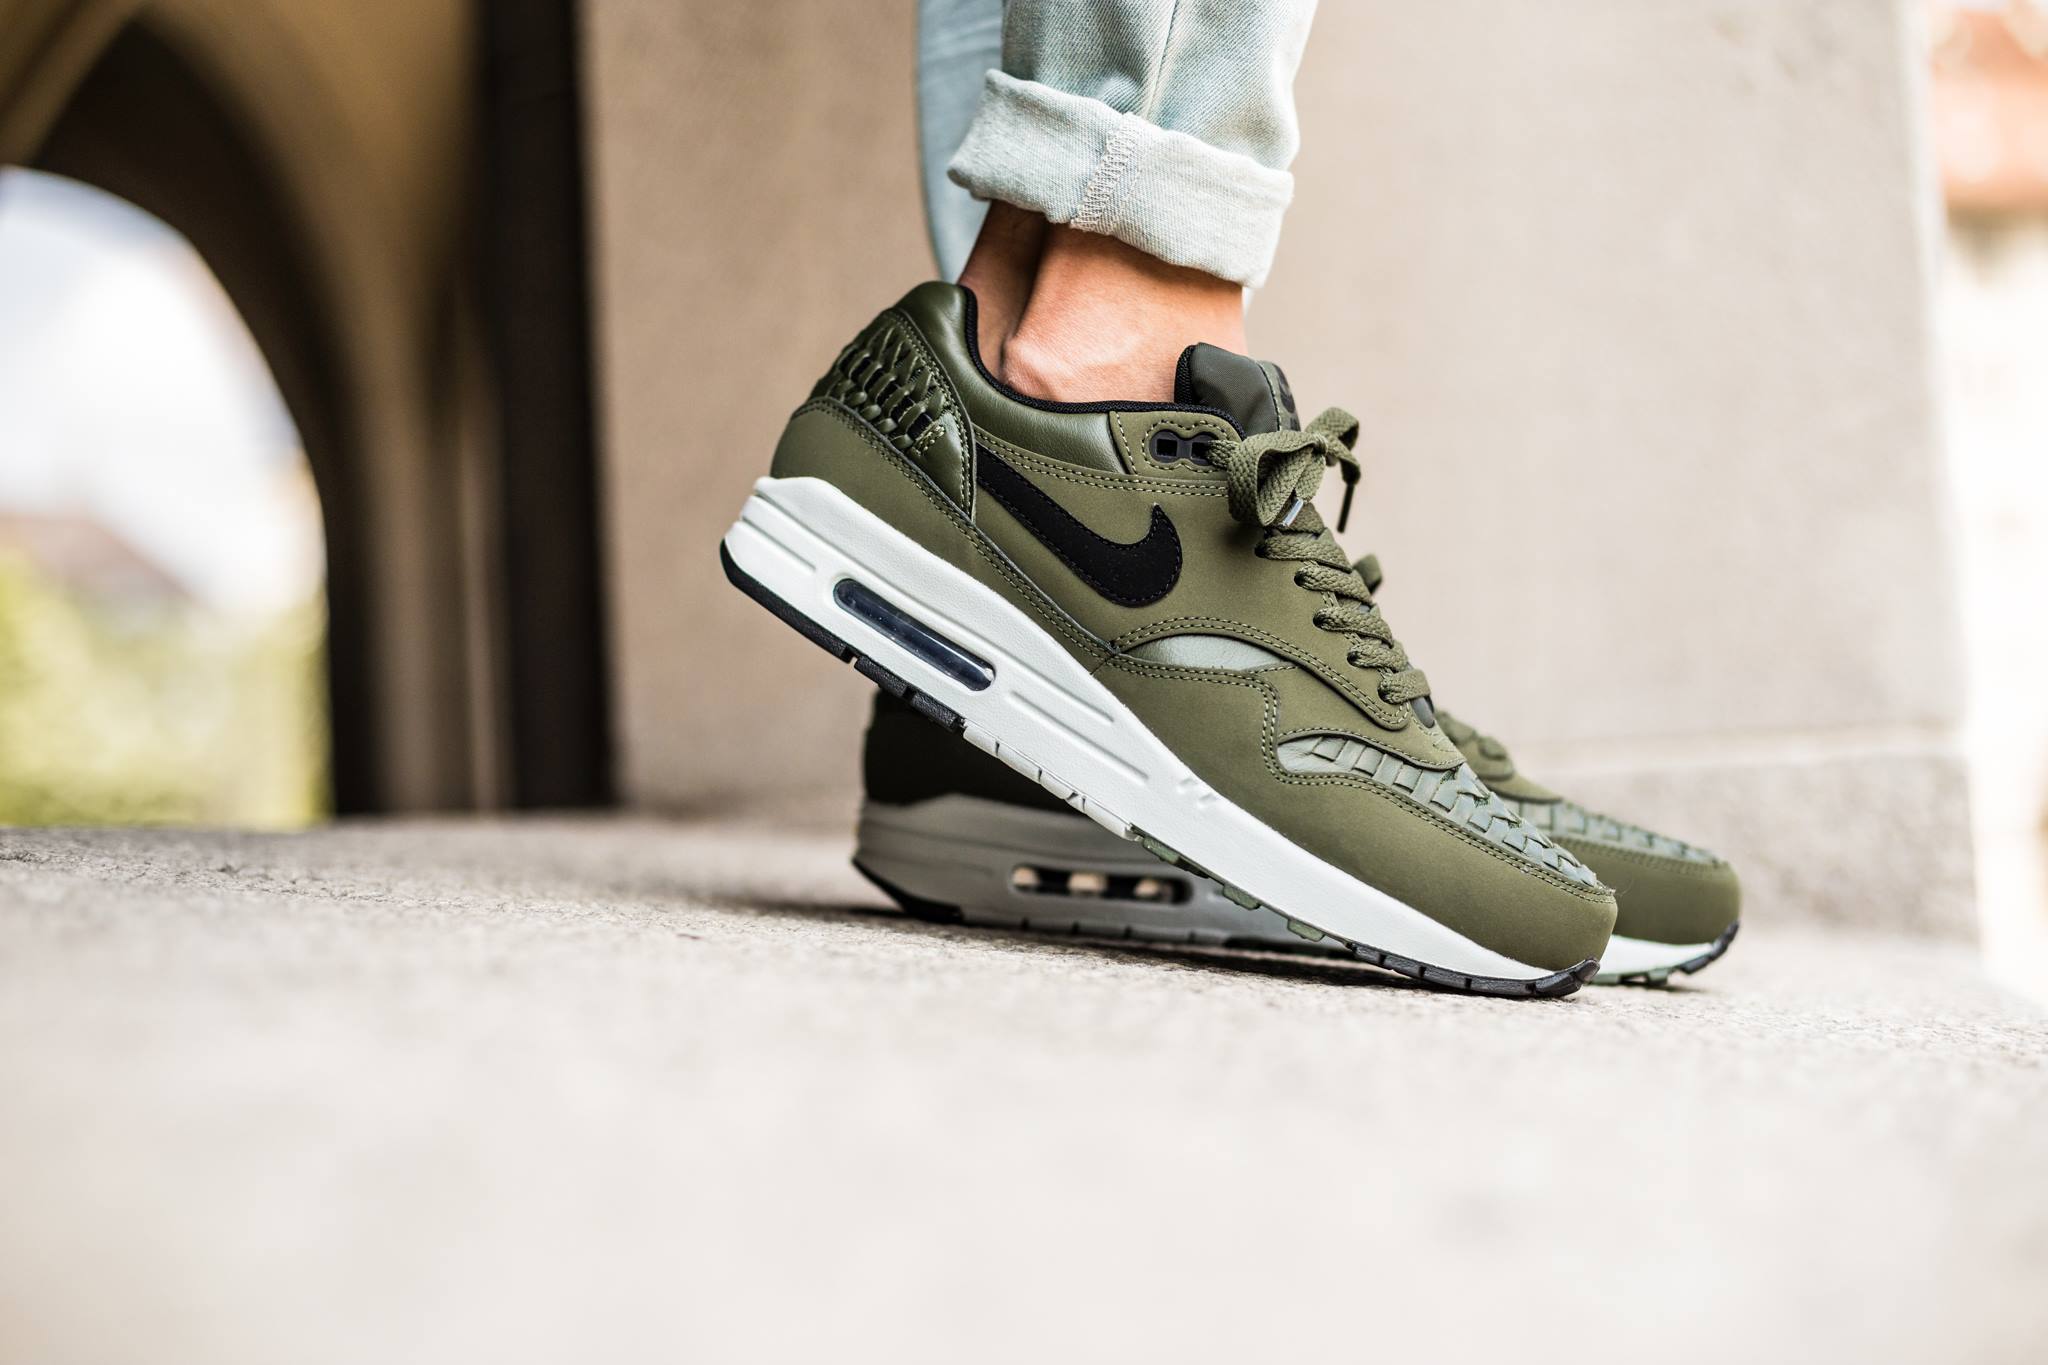 Nike Air Max 1 Woven Carbon Green Available